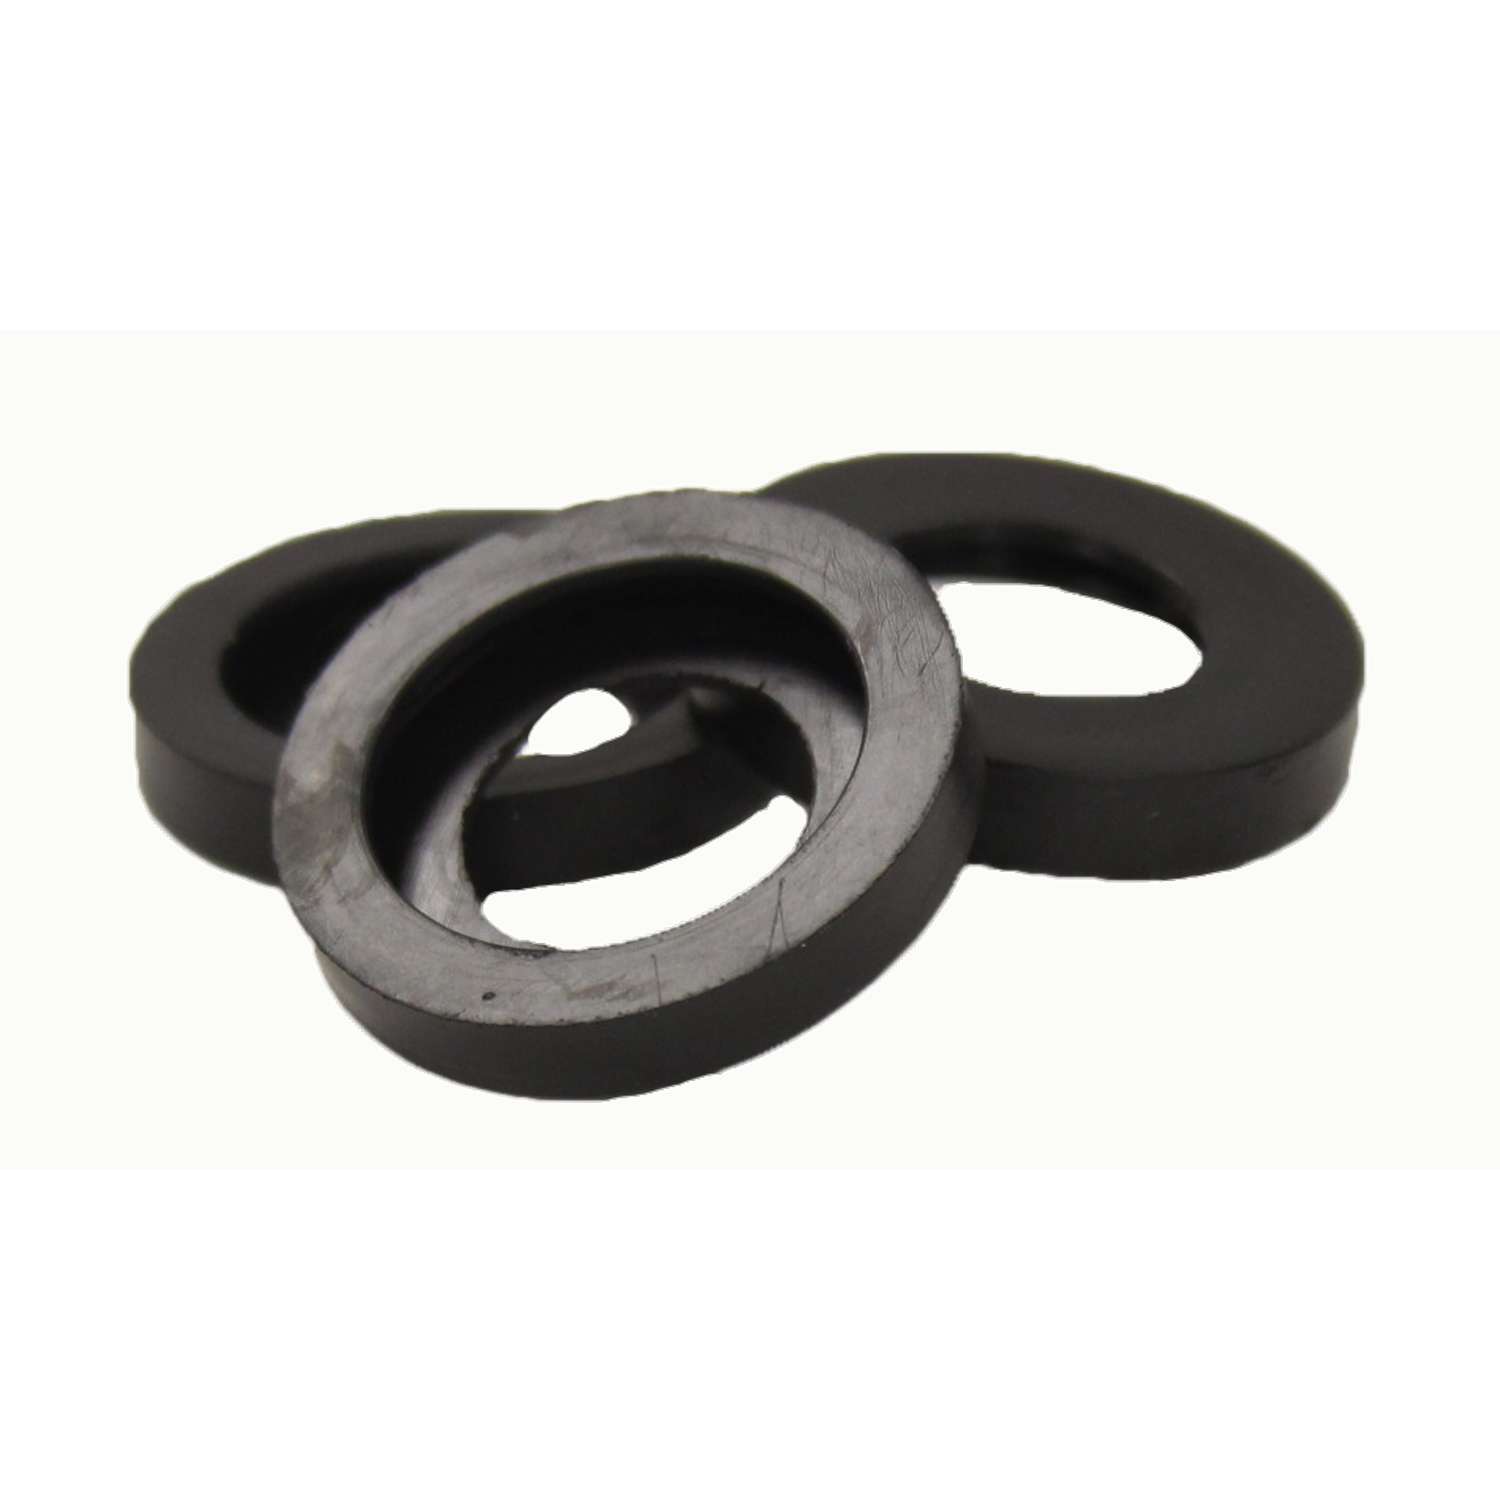 Details about   Gilmour Rubber Hose Washers 10pk 